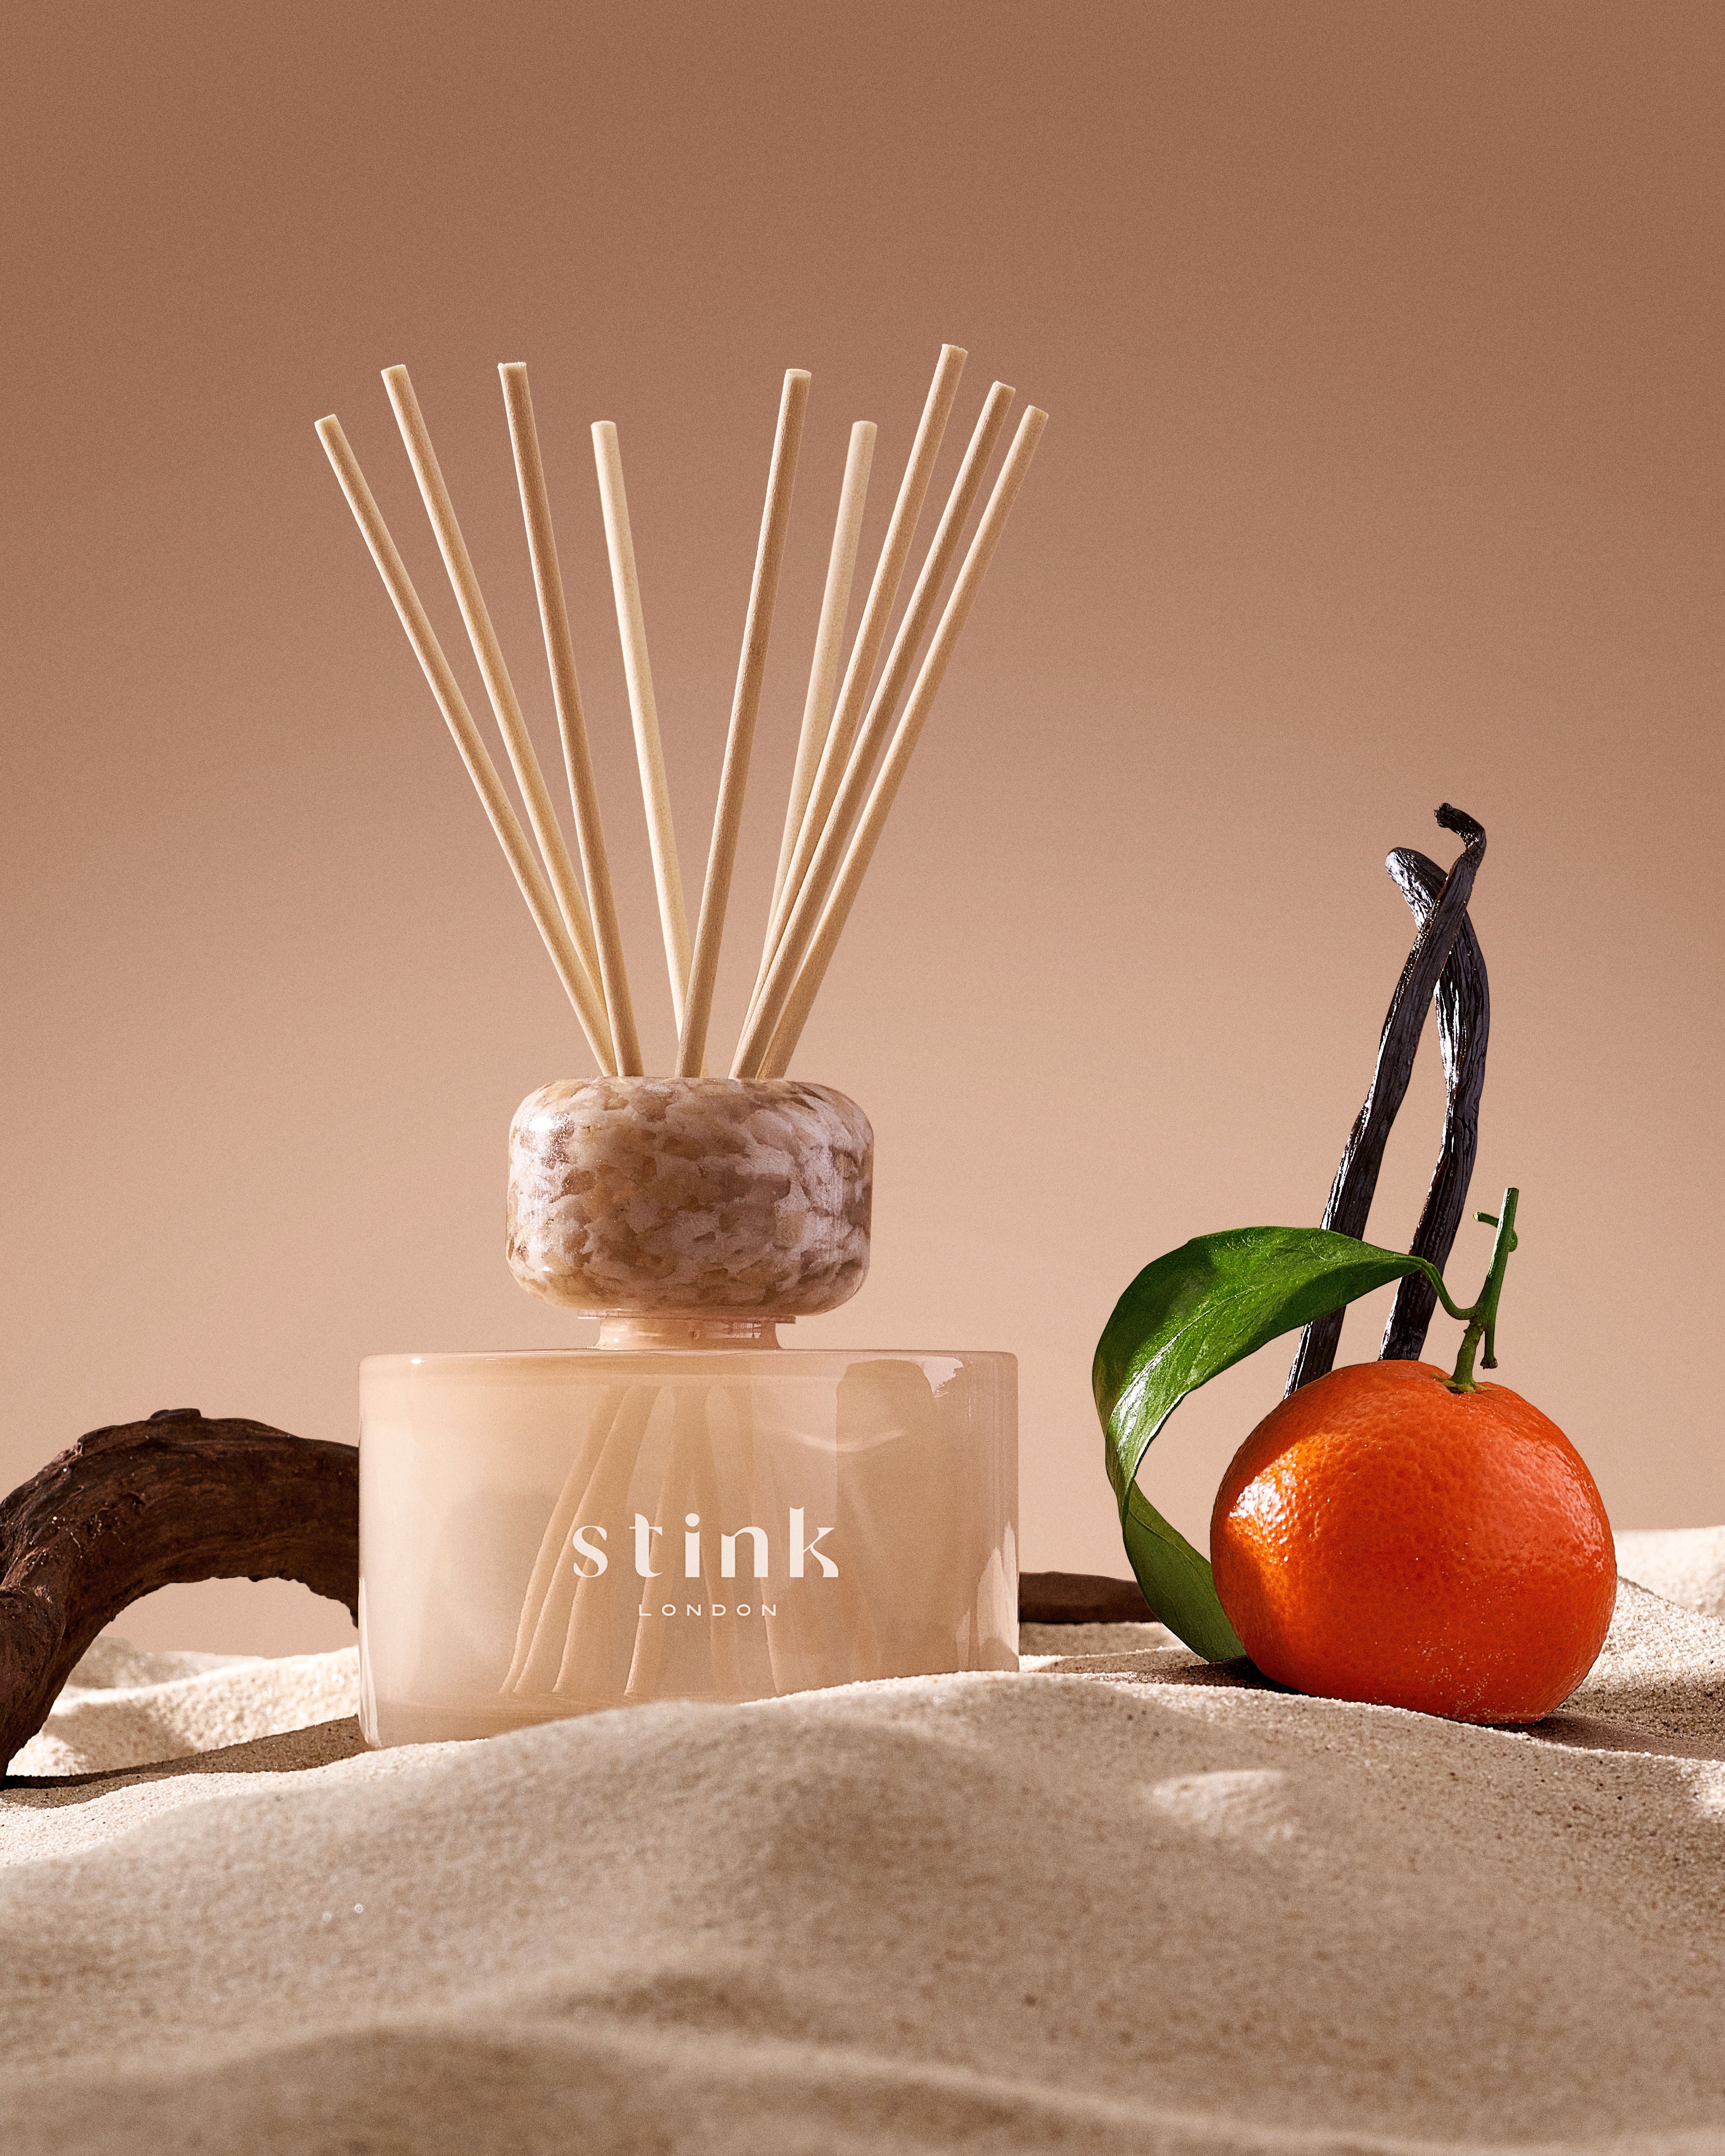 Stink London room with a view tonka vanilla diffuser subscription  refillable refill pouches home fragrance